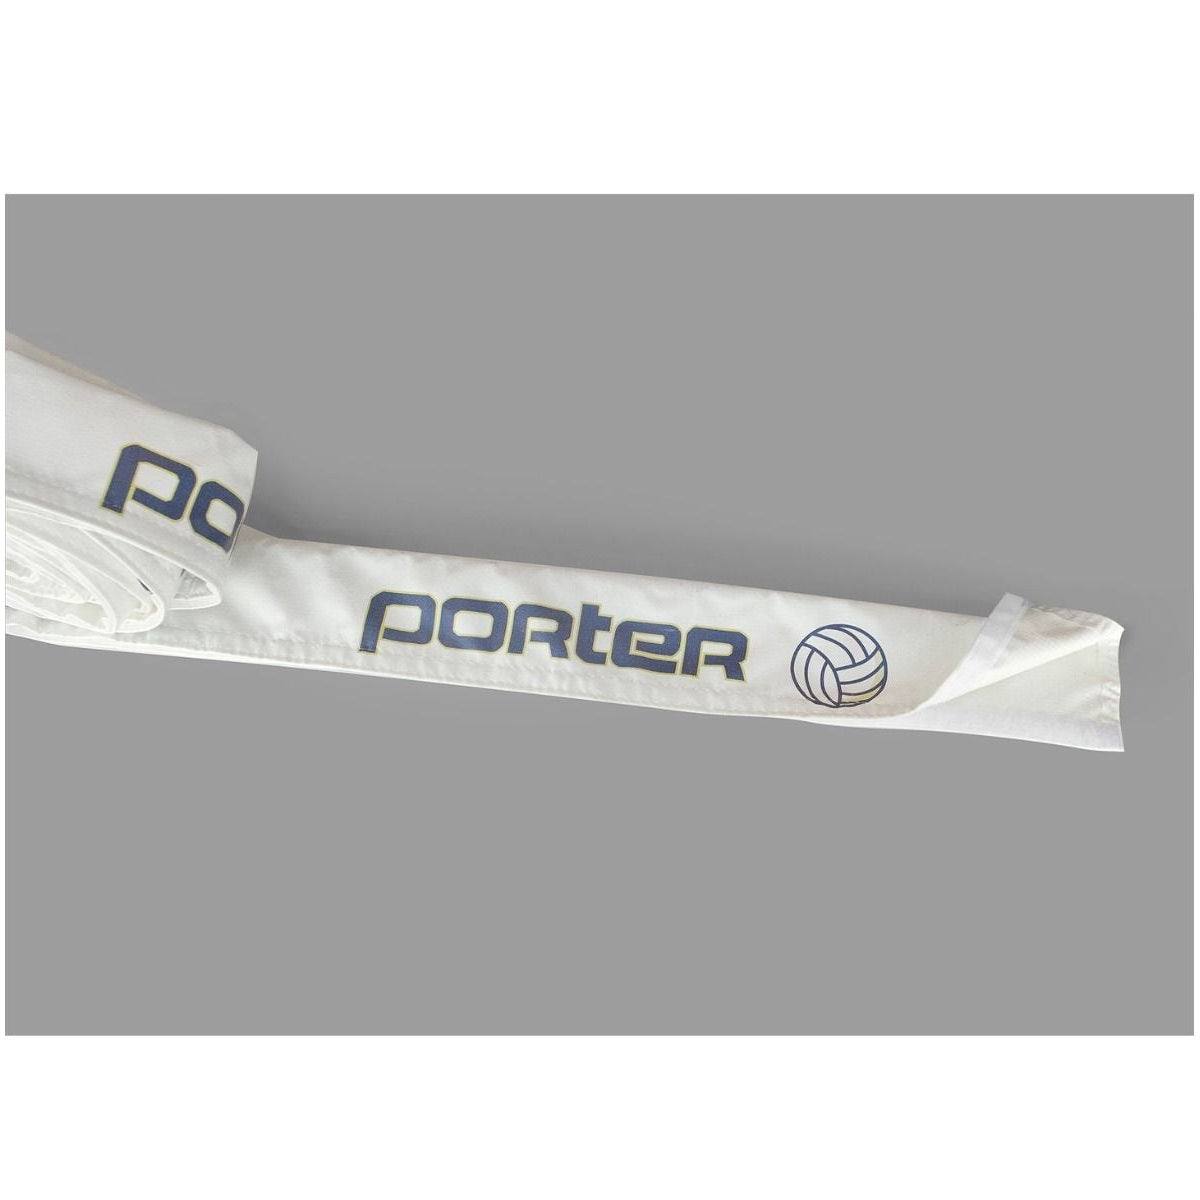 porter volleyball net sleeve with custome graphics 3